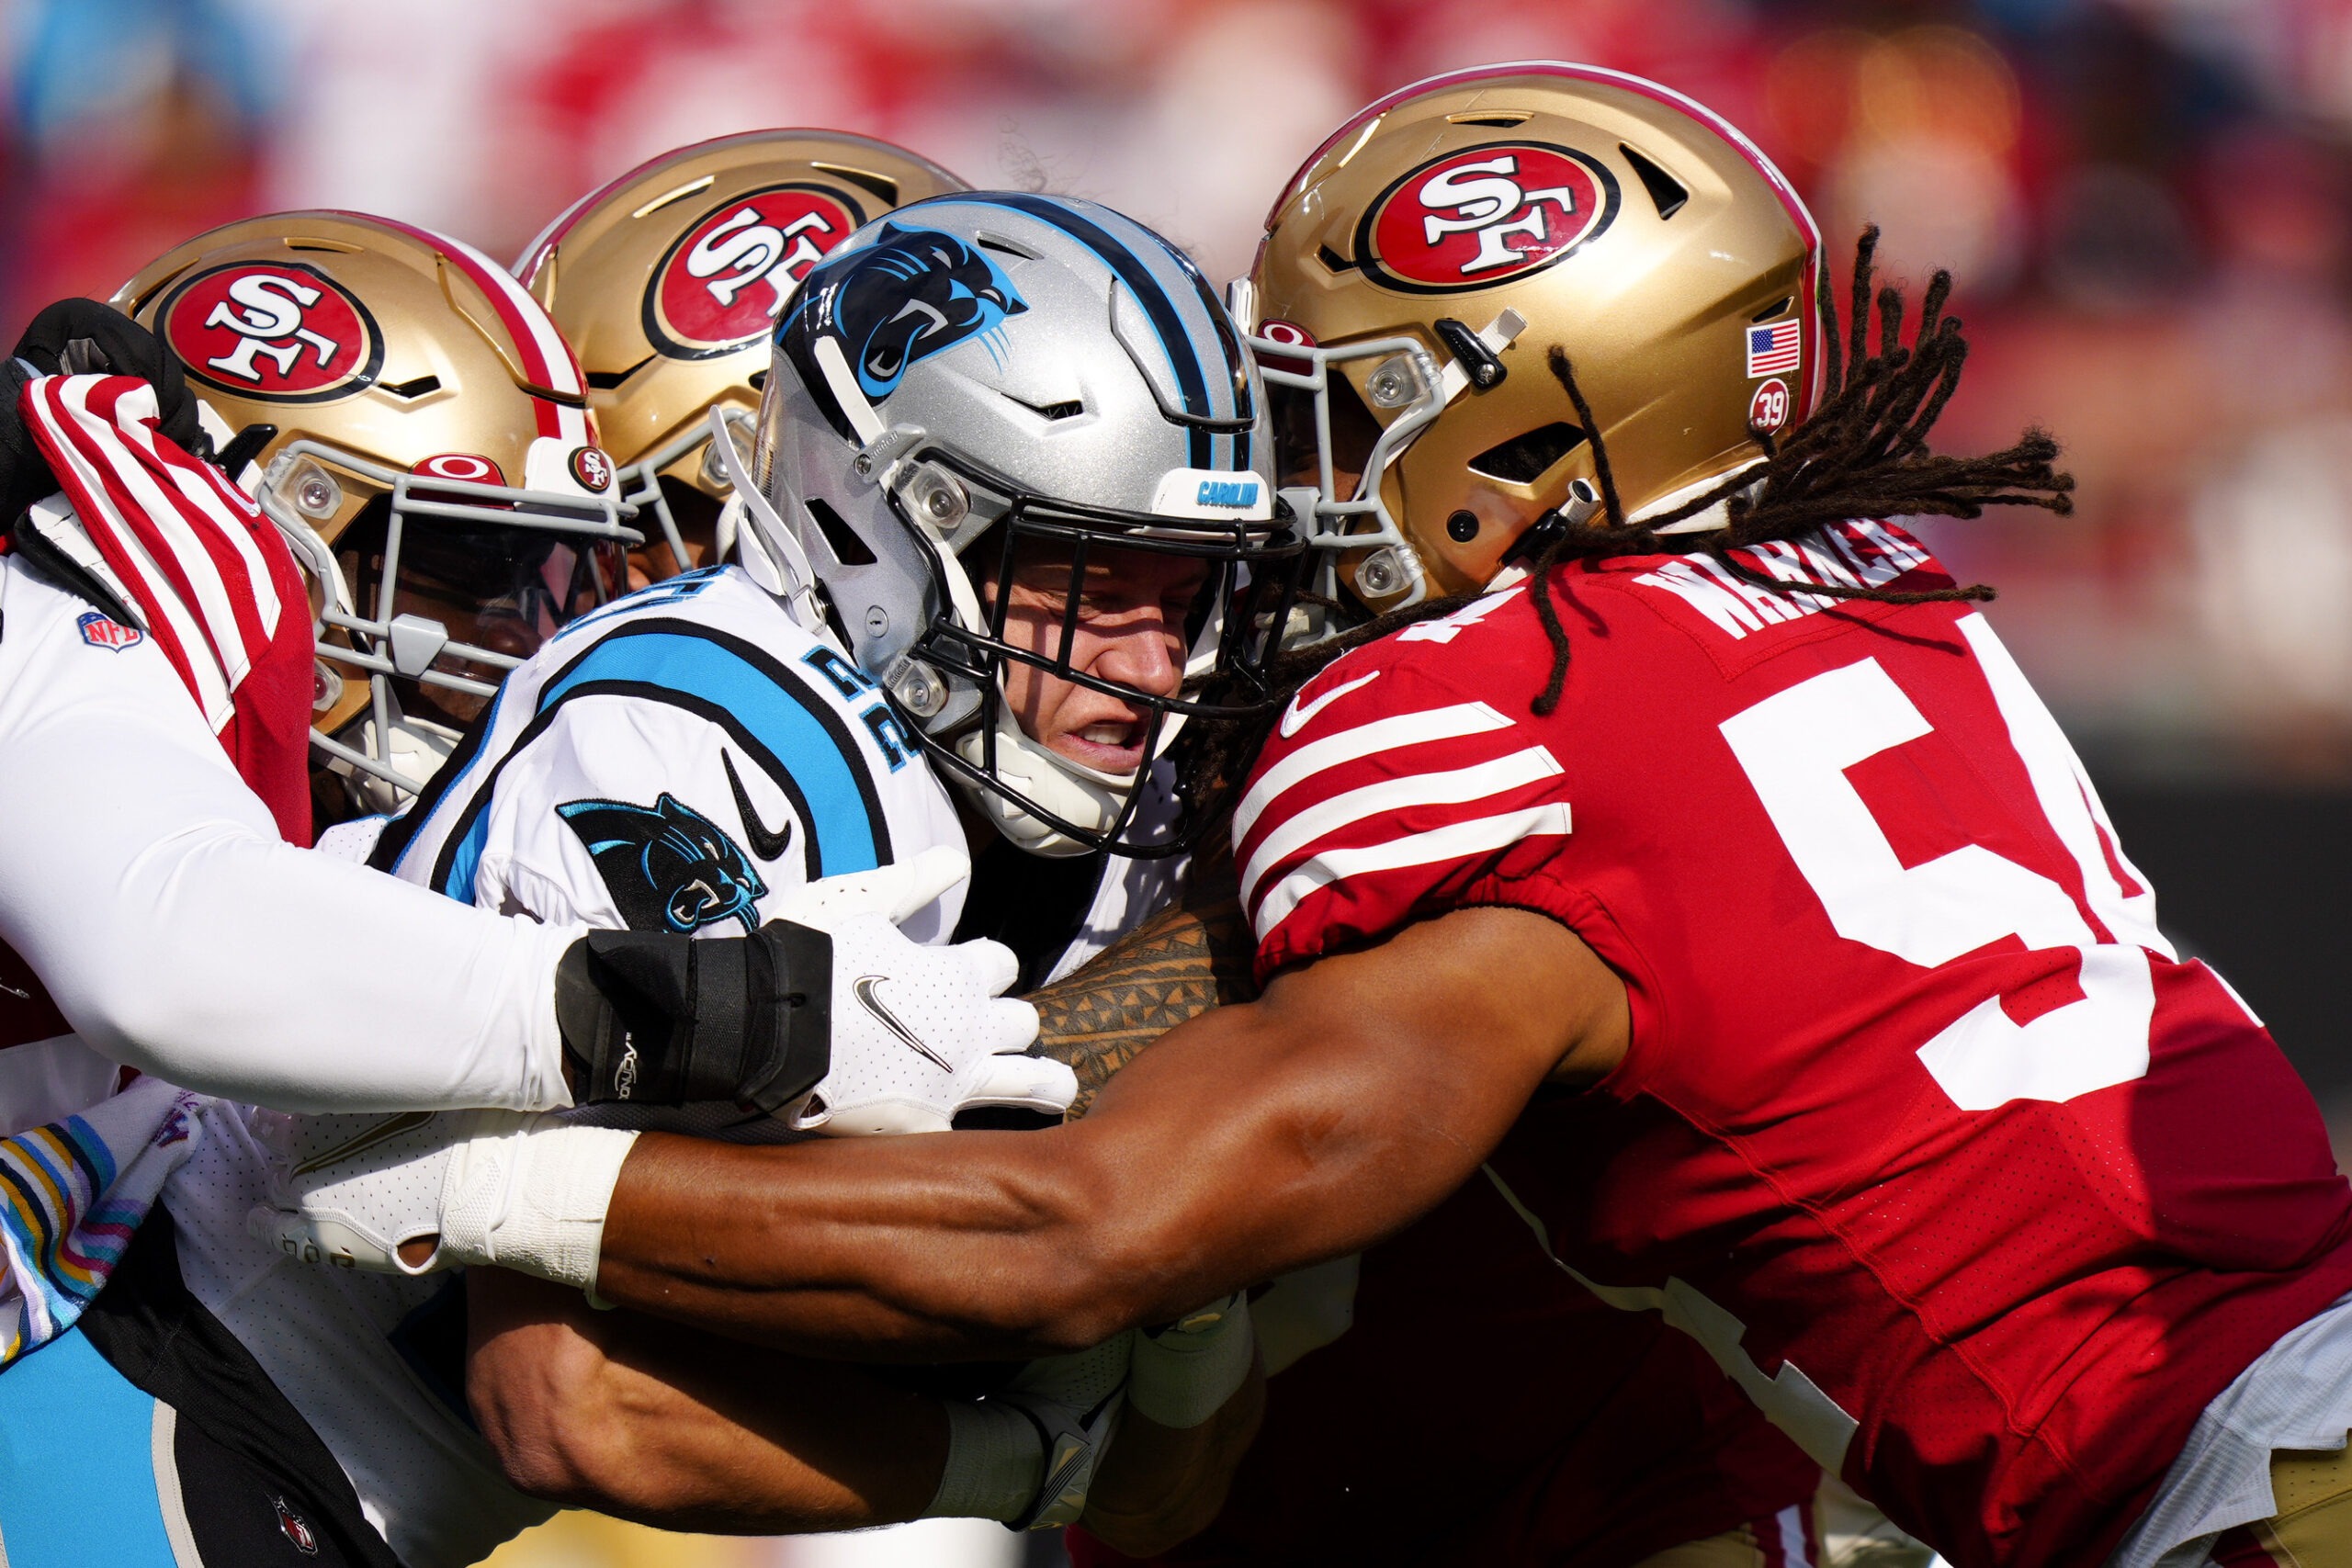 Nickel Coverage: How the 49ers Defense Has Emerged as the Best Unit in the NFL